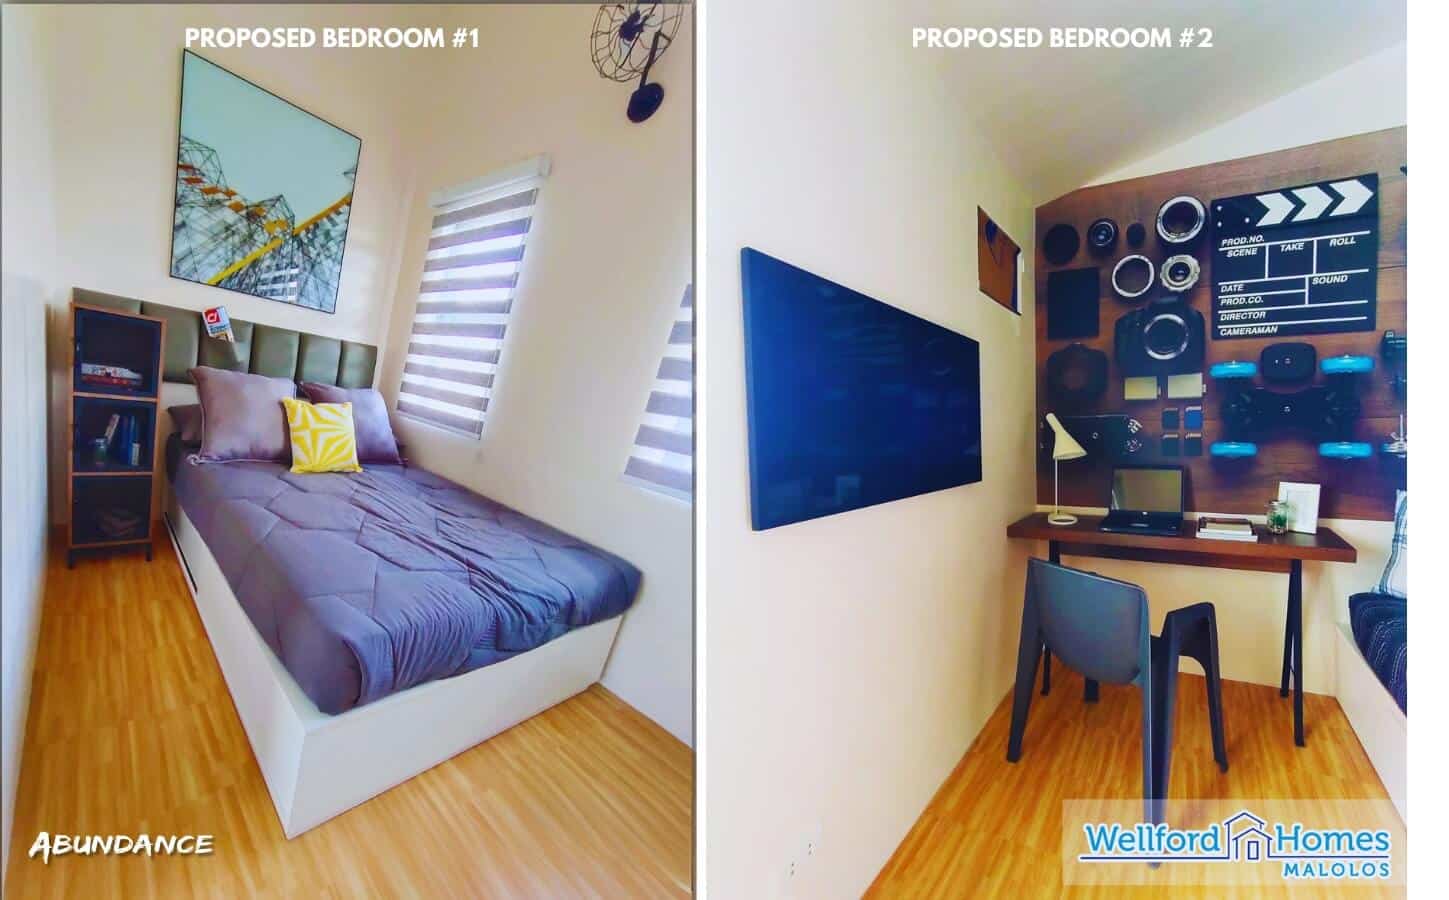 Proposed Bedrooms Wellford Homes Malolos Yvonne townhouse Model